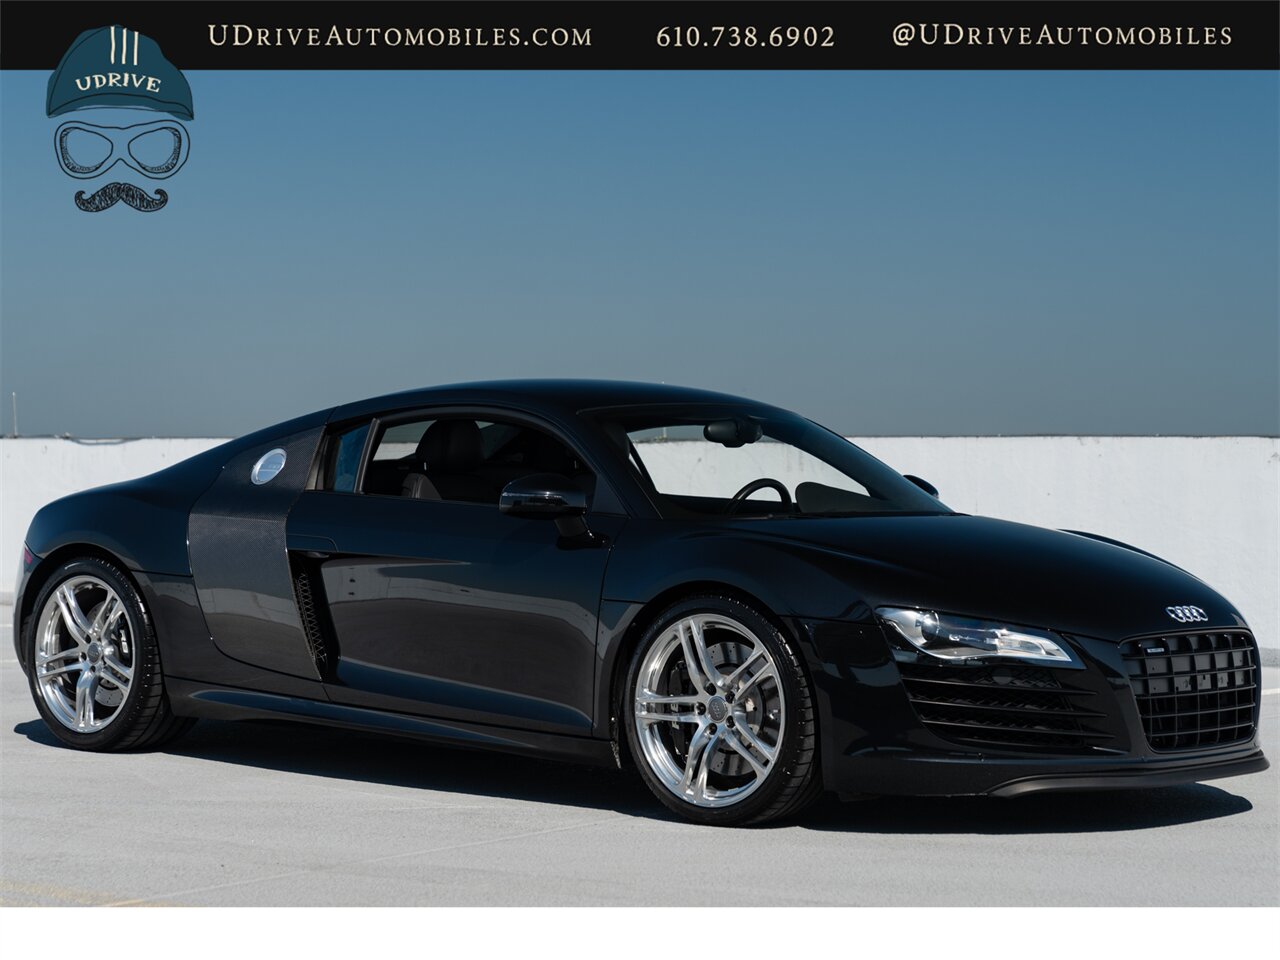 2009 Audi R8 Quattro  4.2L V8 6 Speed Manual - Photo 15 - West Chester, PA 19382